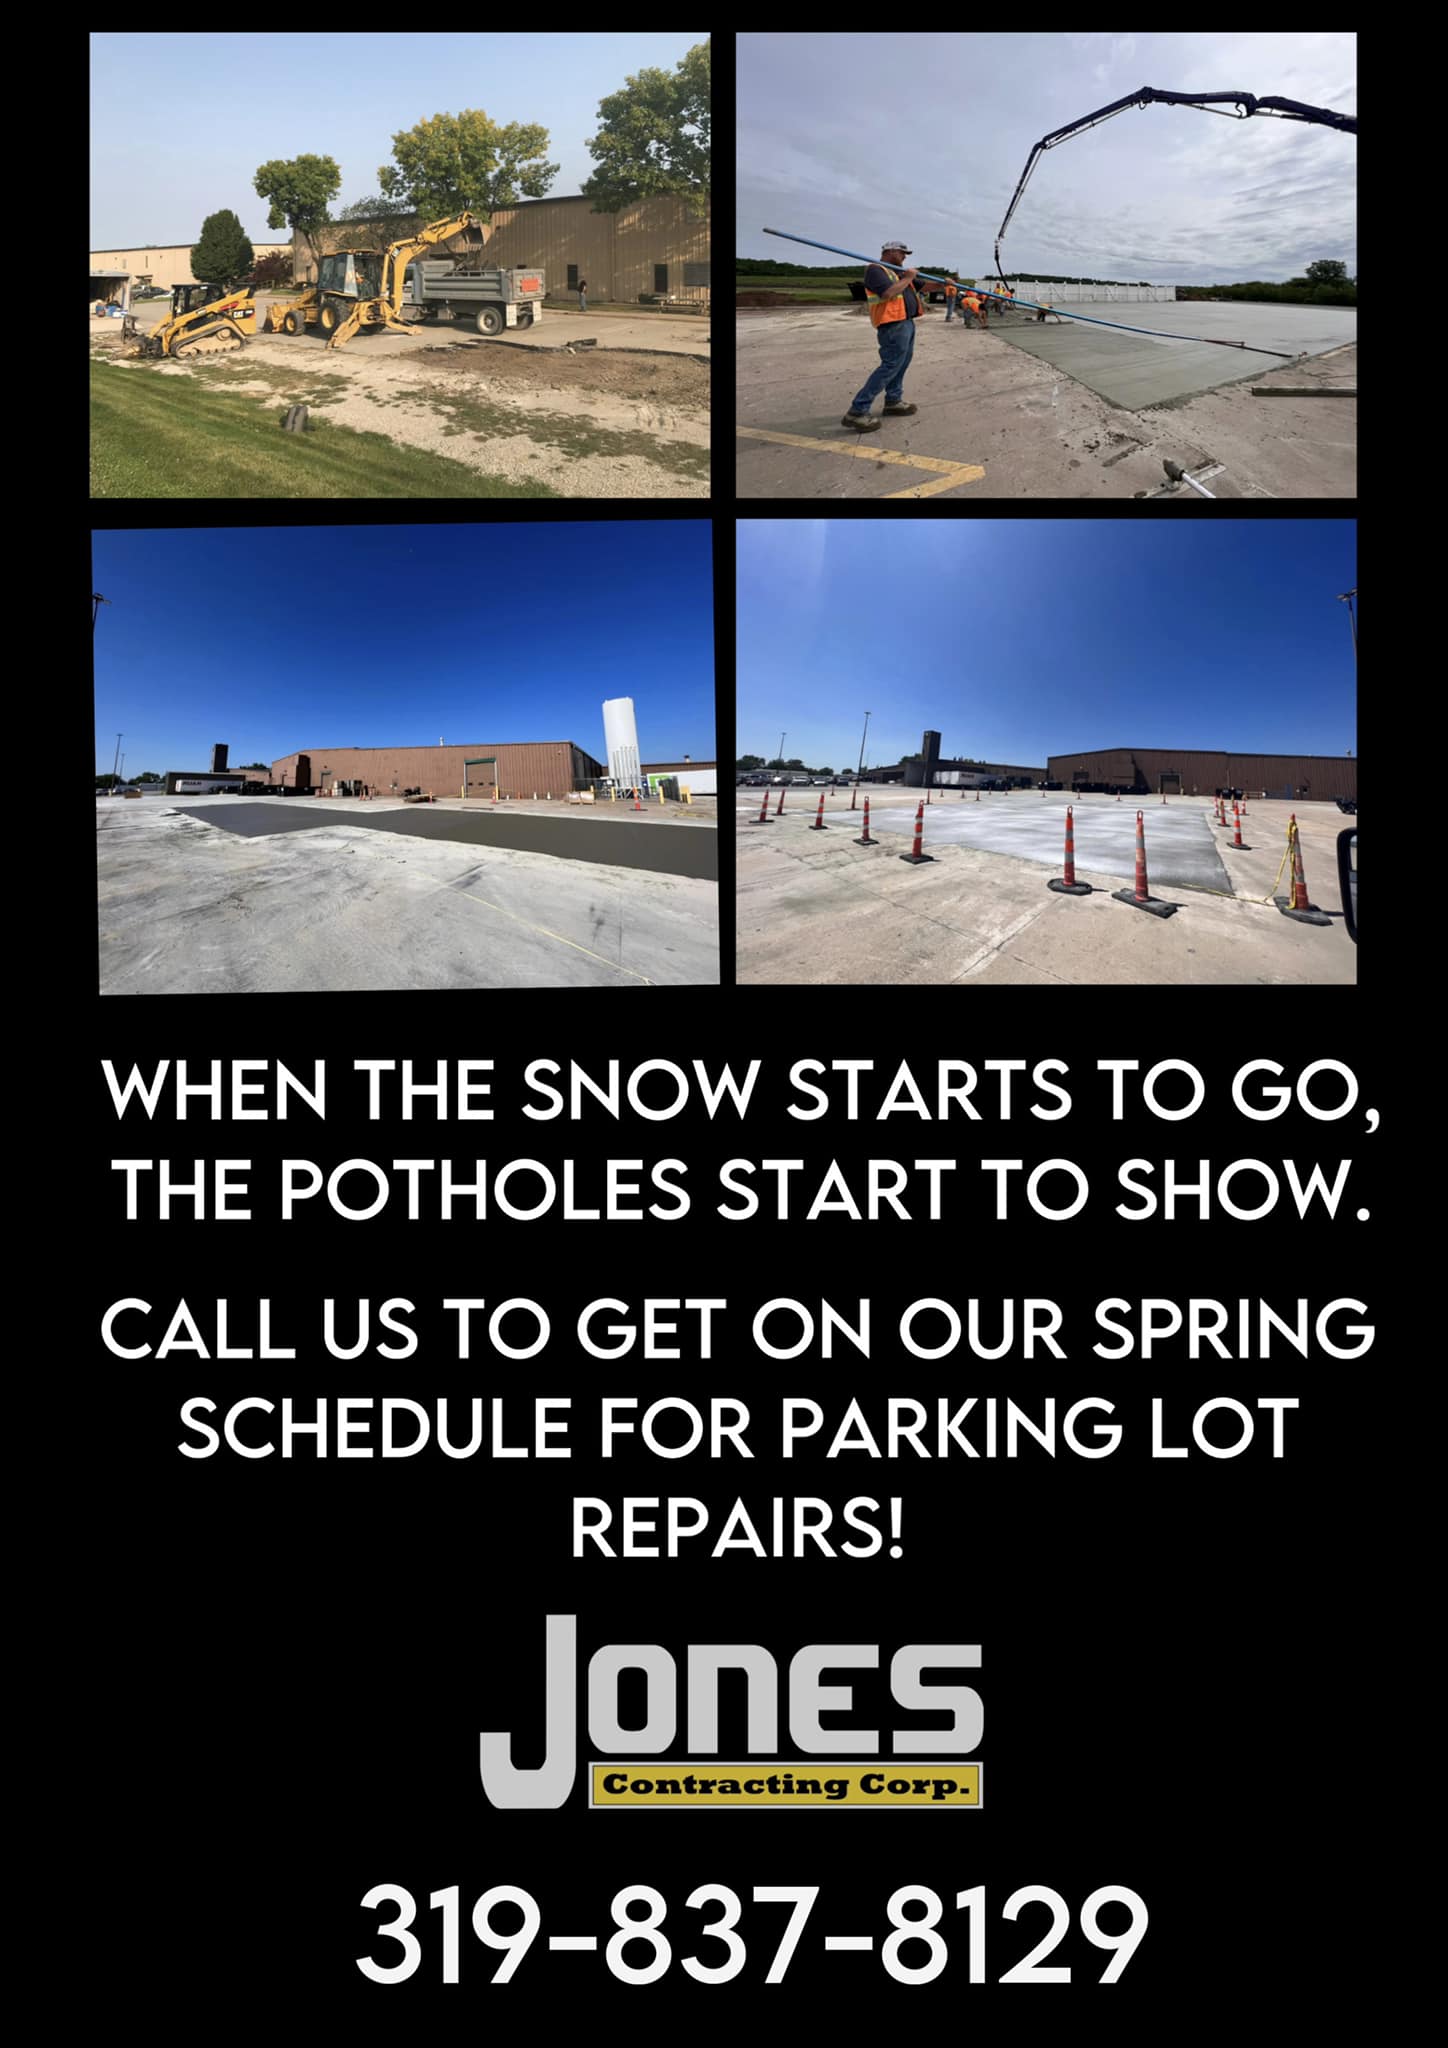 Jones Contracting Corp. 1956 W Point Rd, West Point Iowa 52656